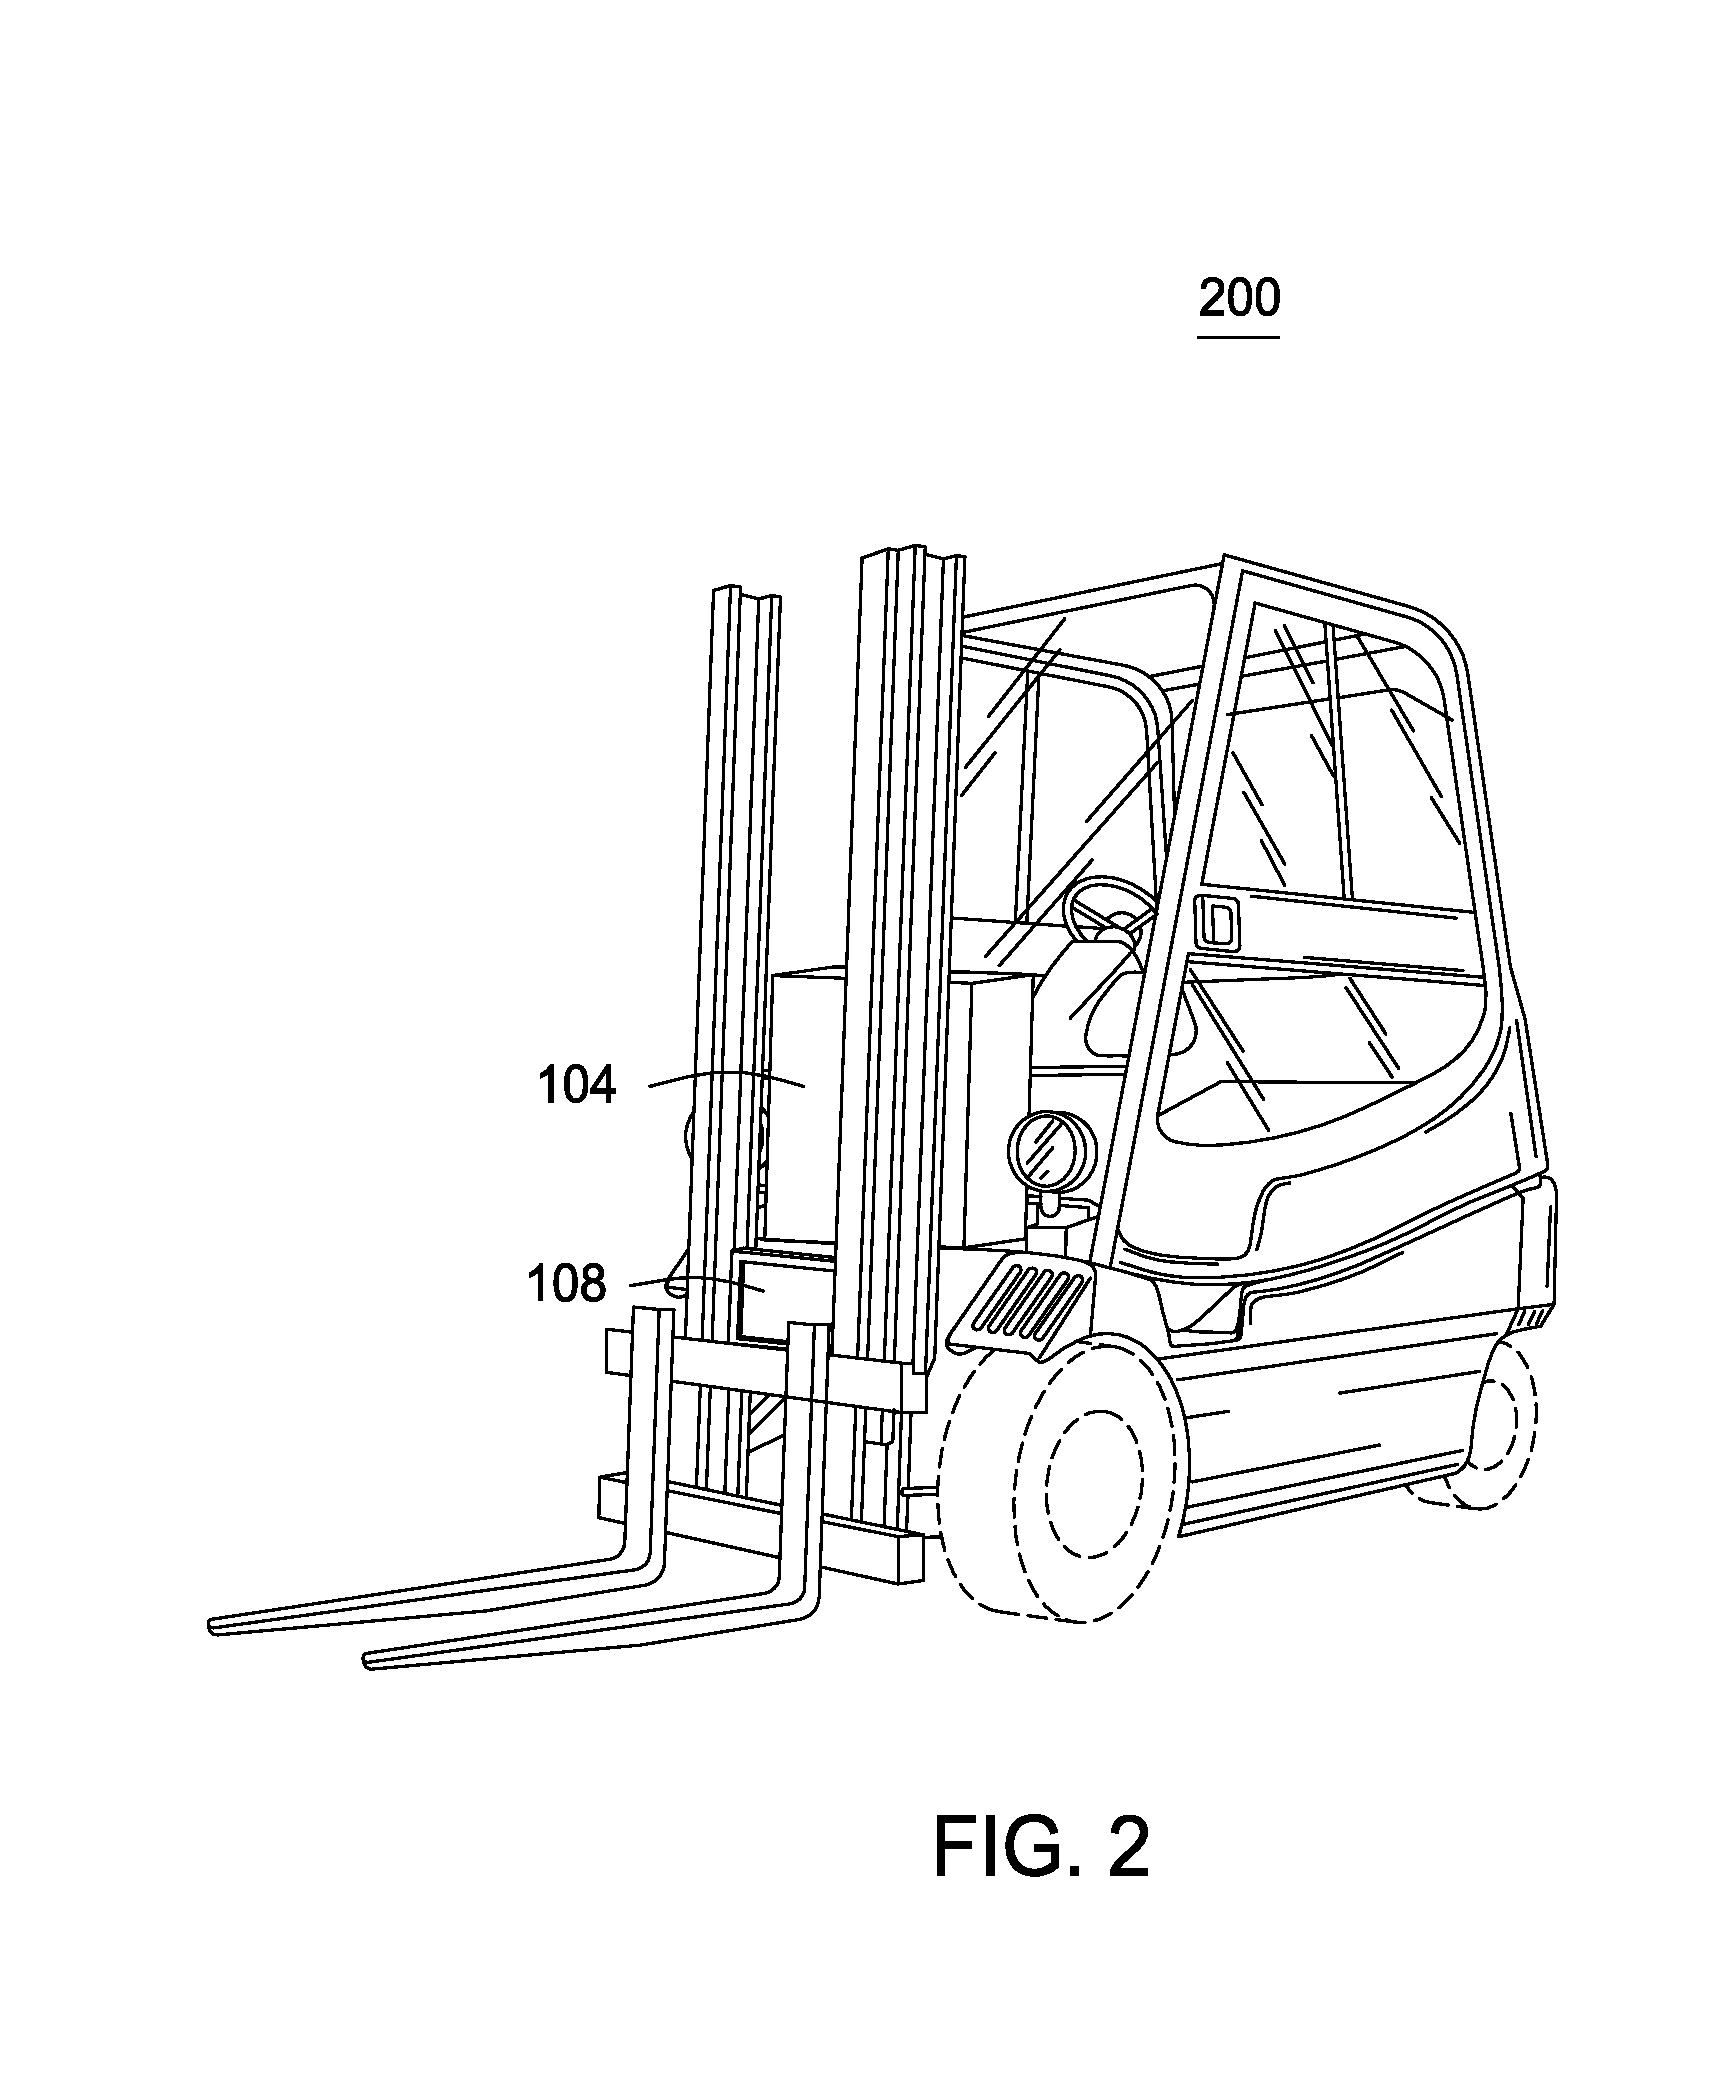 Method and apparatus for virtualizing industrial vehicles to automate task execution in a physical environment